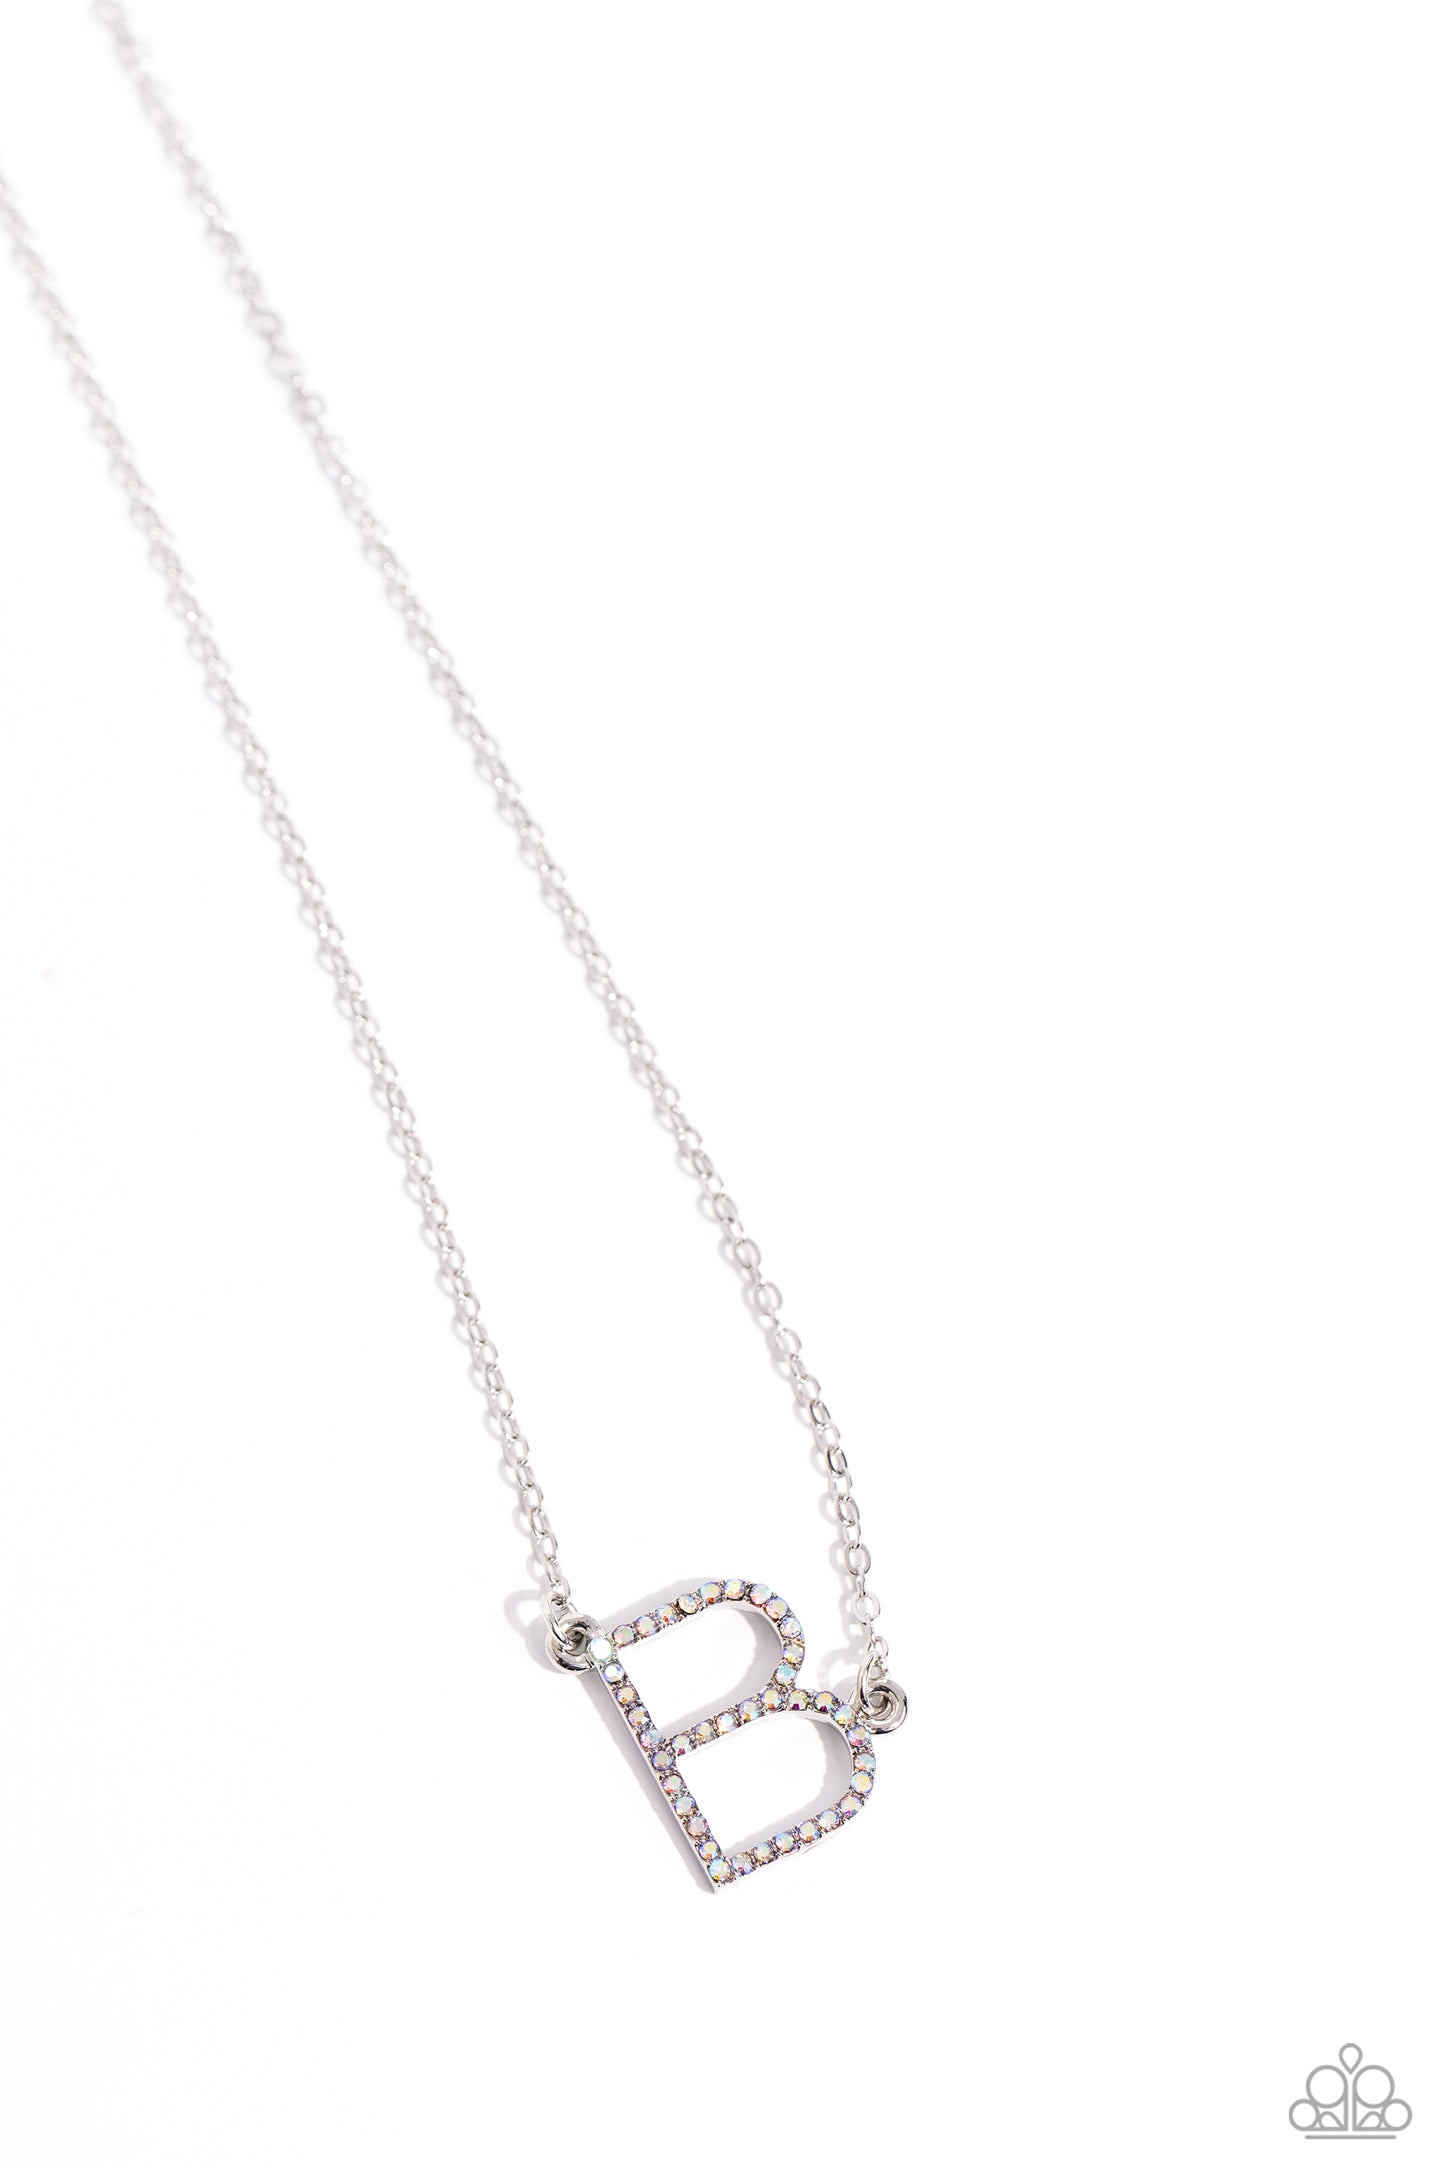 INITIALLY Yours Multi "B" Necklace - Paparazzi Accessories  Embossed with dainty iridescent rhinestones, a silver letter "B" hovers below the collar from a dainty silver chain, for a sentimentally simple design. Features an adjustable clasp closure. Due to its prismatic palette, color may vary.  Sold as one individual necklace. Includes one pair of matching earrings.  P2DA-MTXX-125XX